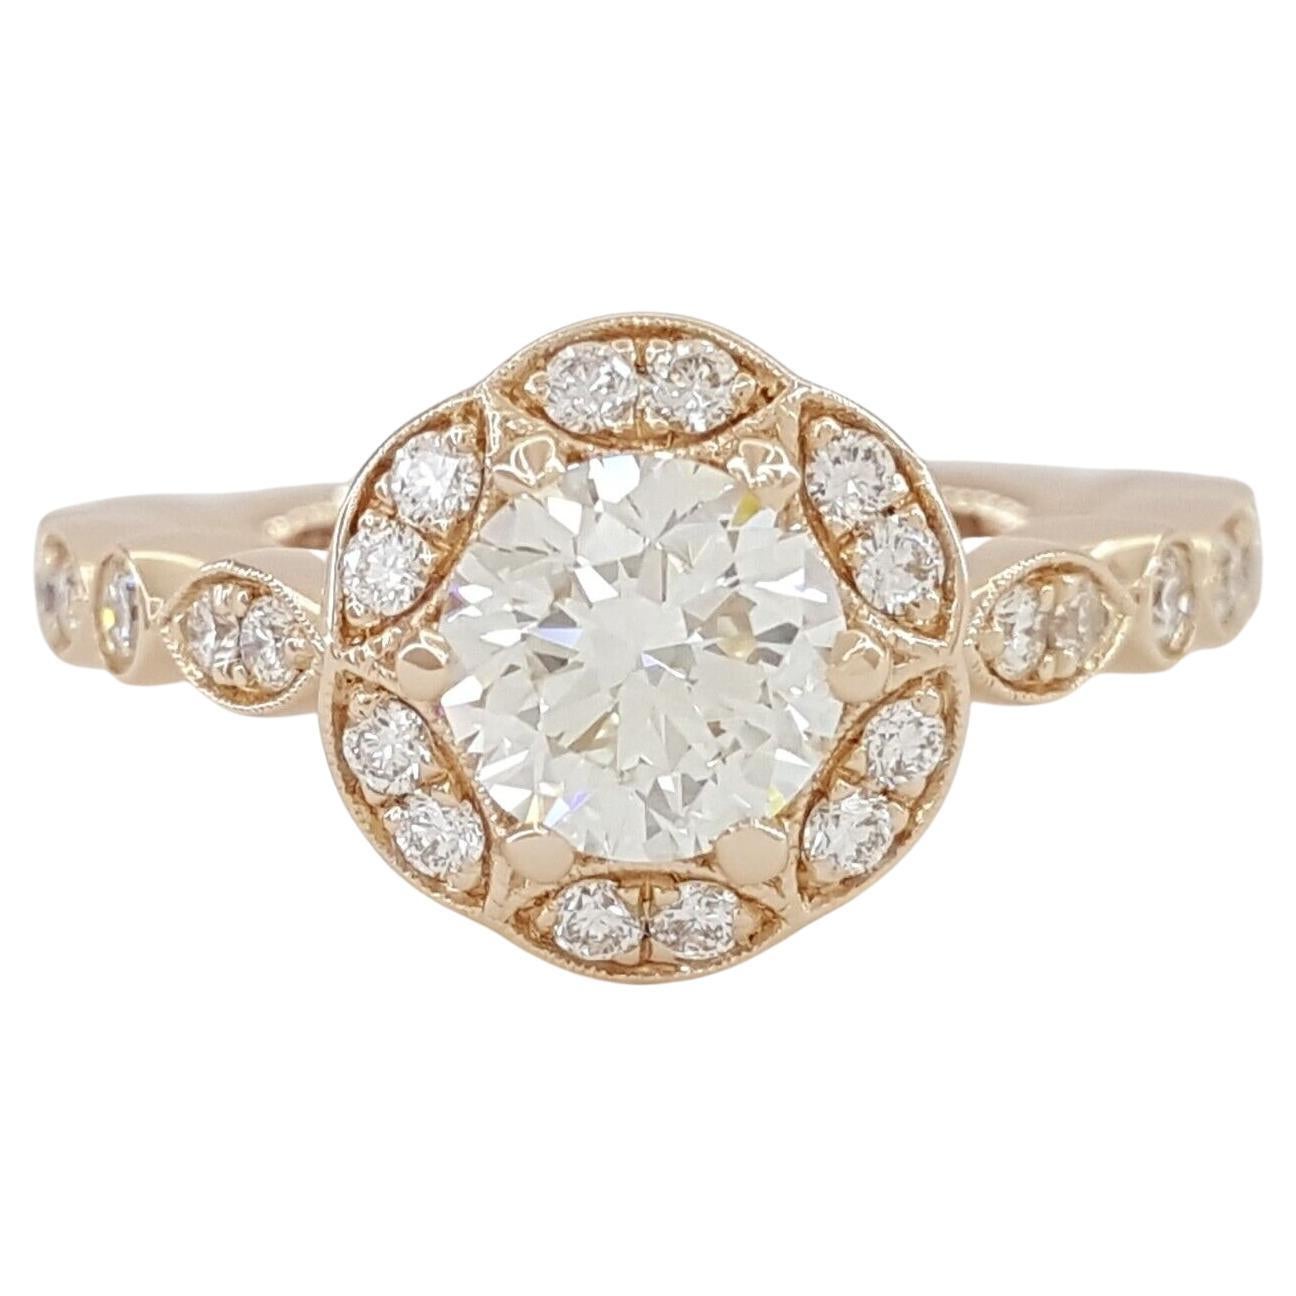 GIA Certified Brilliant Cut Diamond Halo Engagement Ring